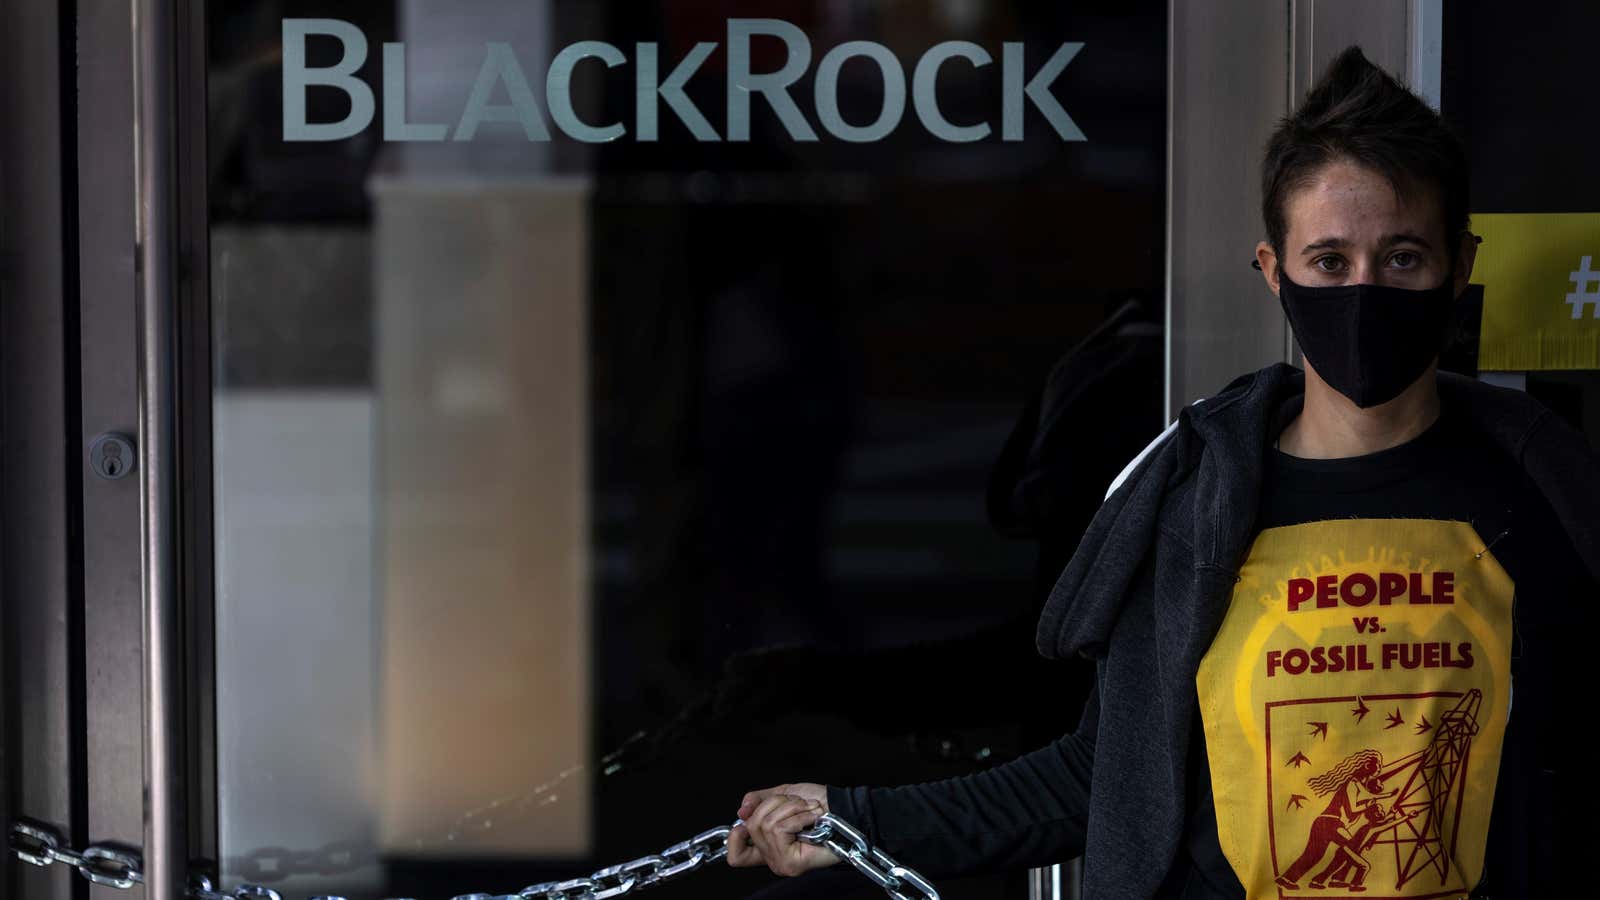 BlackRock was an early proponent of climate action in the financial sector, but voted in favor of only about half of climate resolutions put forward by shareholders of companies in its portfolio.